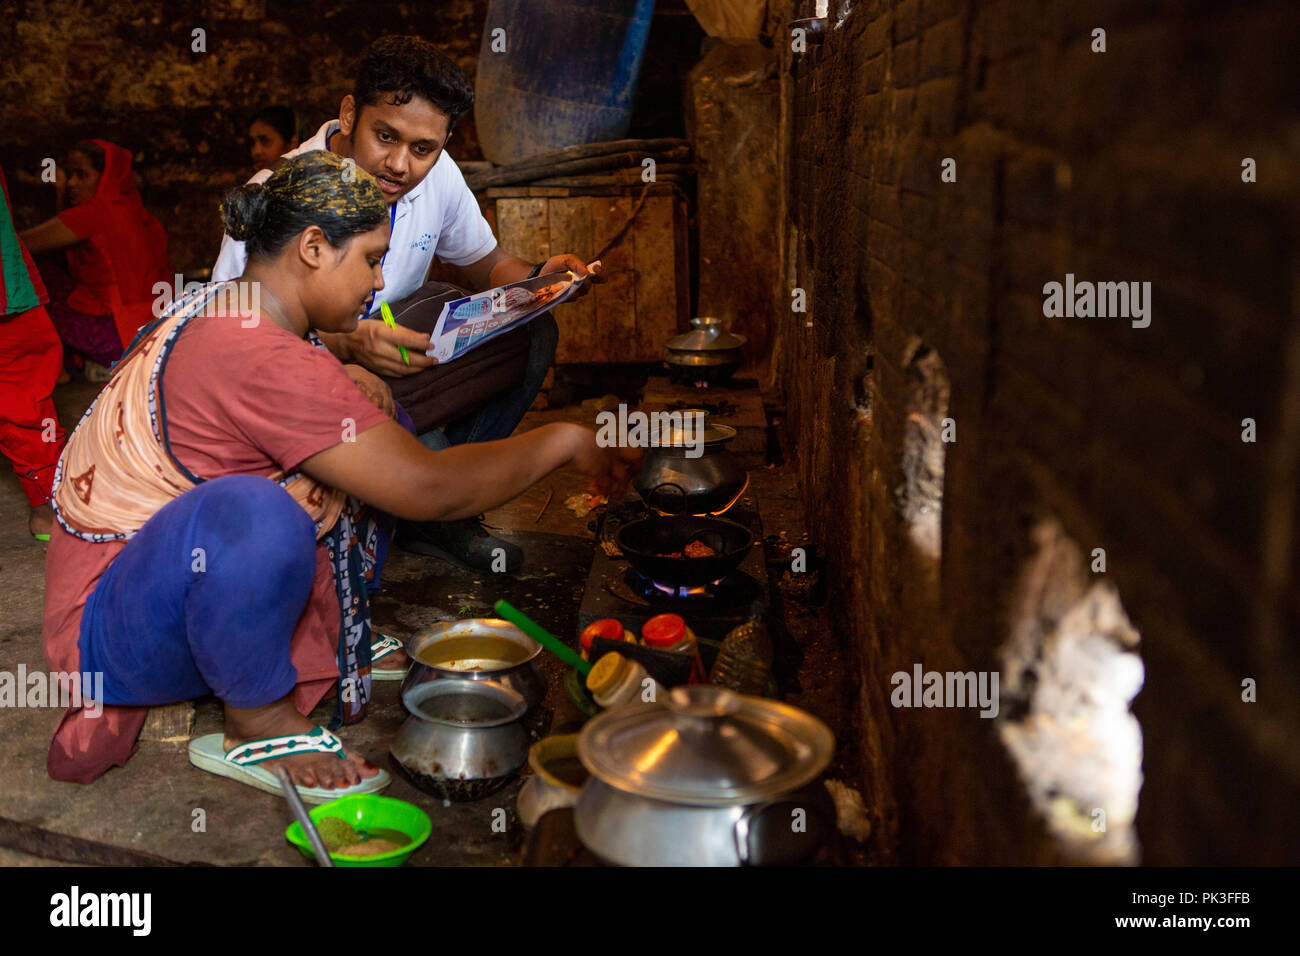 A man talking to a woman about the working conditions of her garment factory as she cooks in a communal kitchen in the slums of Dhaka, Bangladesh. Stock Photo